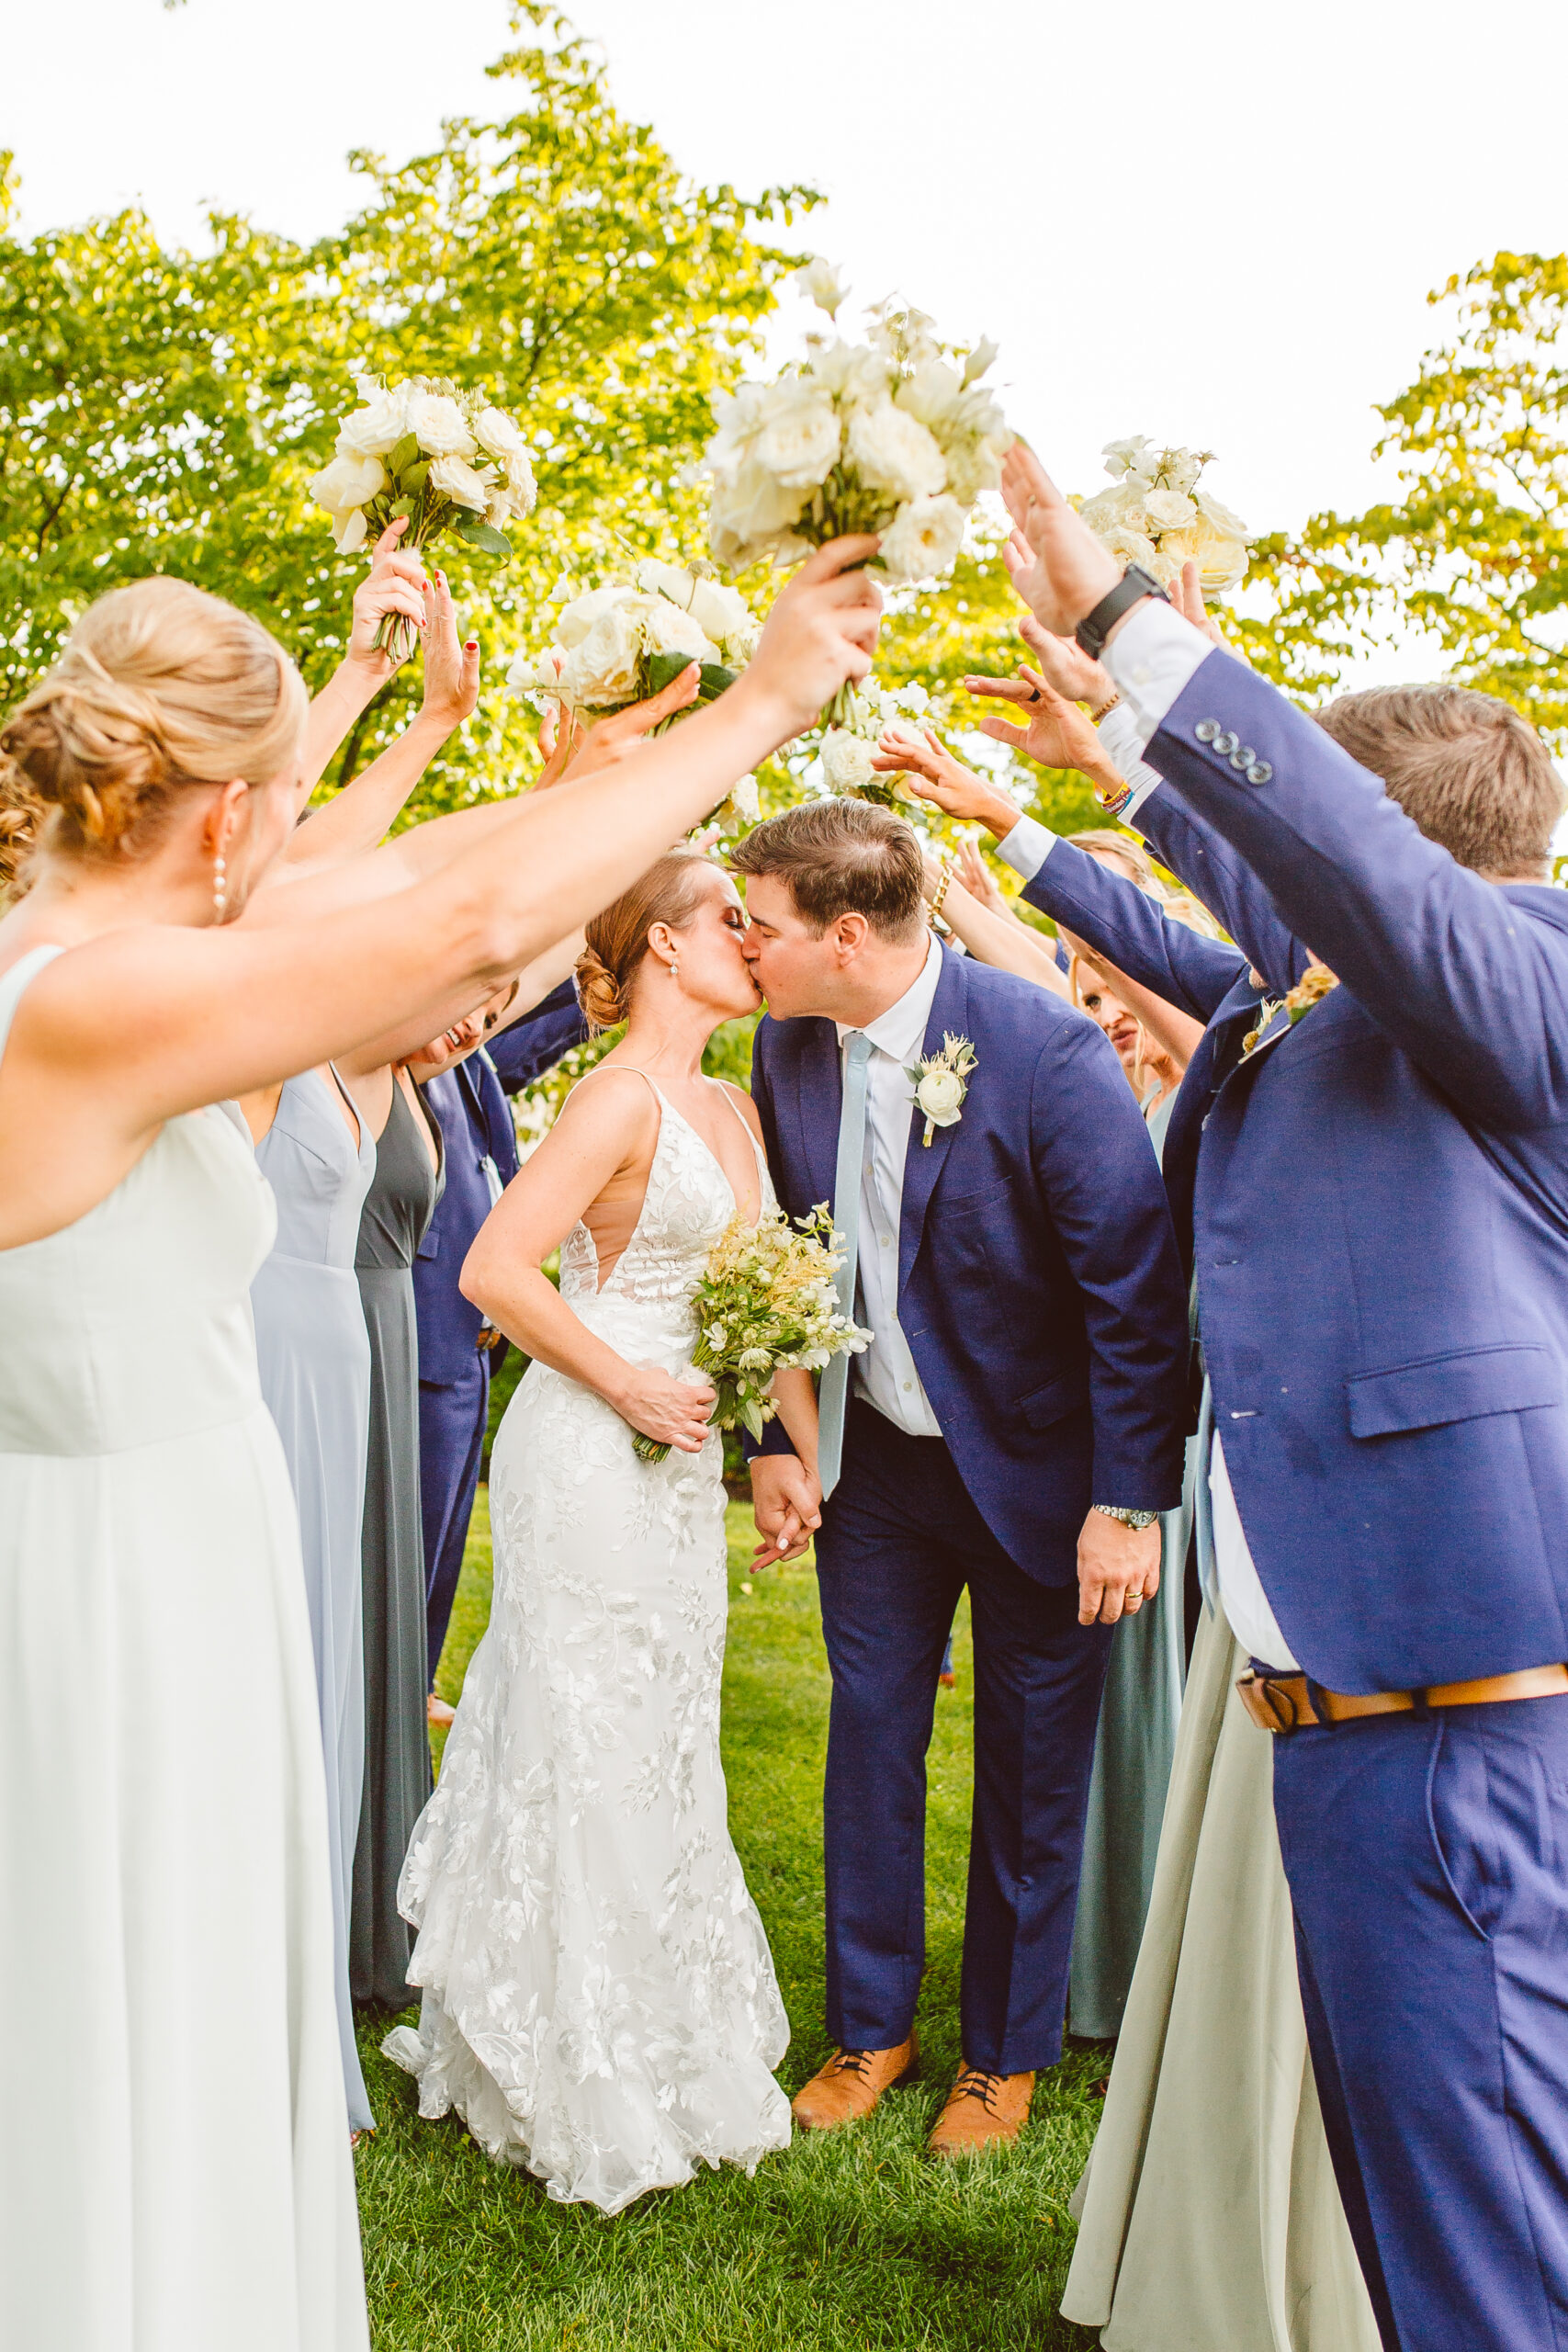 Wedding party photos from country club wedding captured by Charlotte wedding photography Brooke Michelle Photo